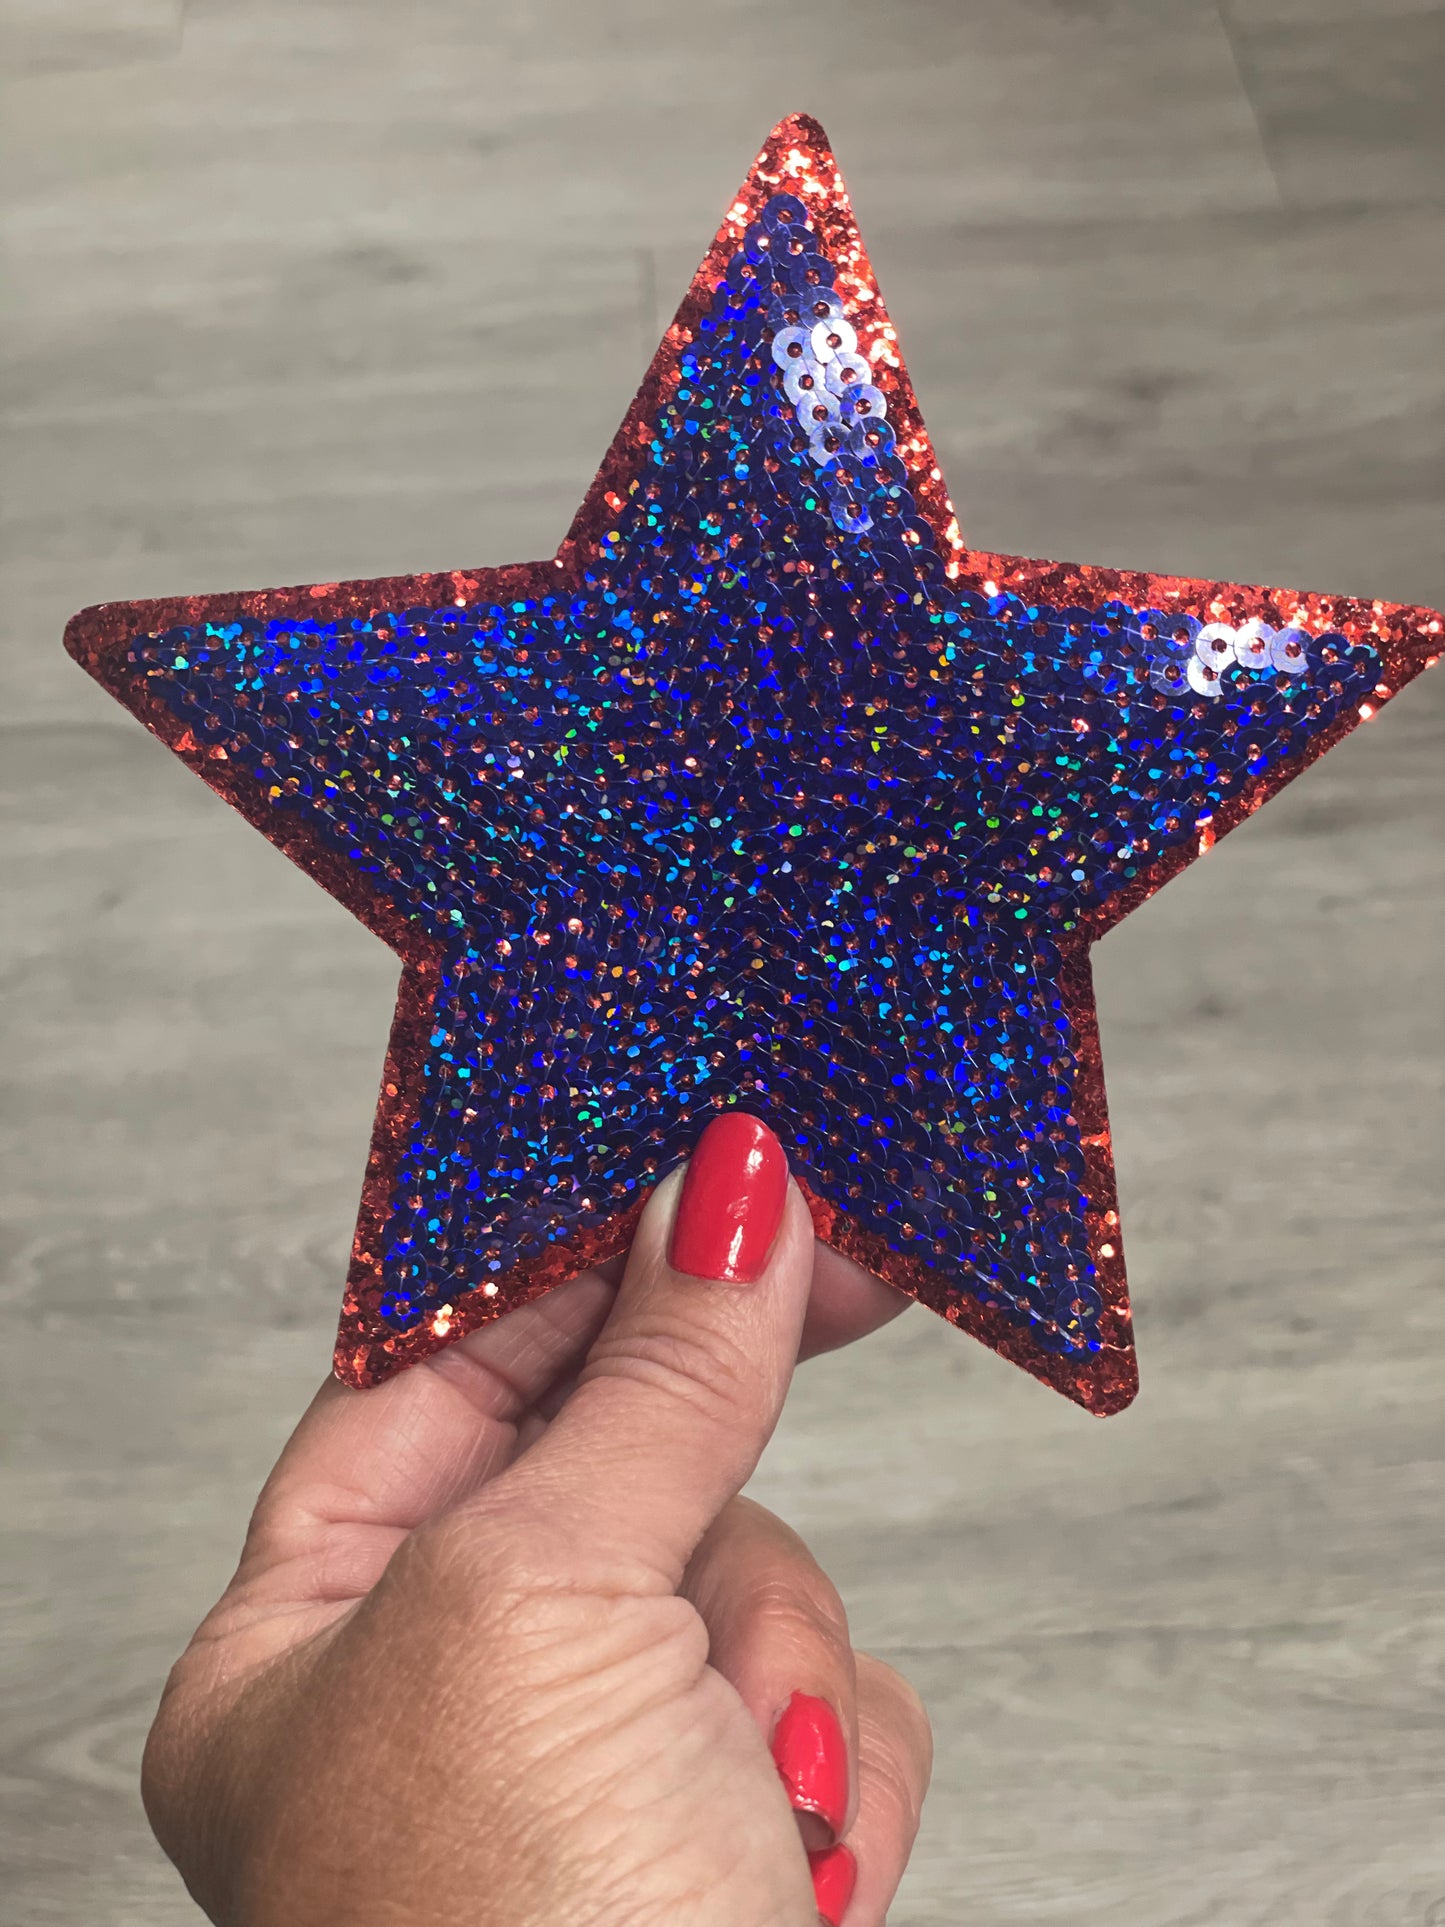 Star Patch, Sequin Star Patch, Royal Blue and Red 5" Sequin Star Patch, Iron on Patch, DIY, Trucker Hat Patch, Preppy Patch Trendy Patch Patch, Sequin Star